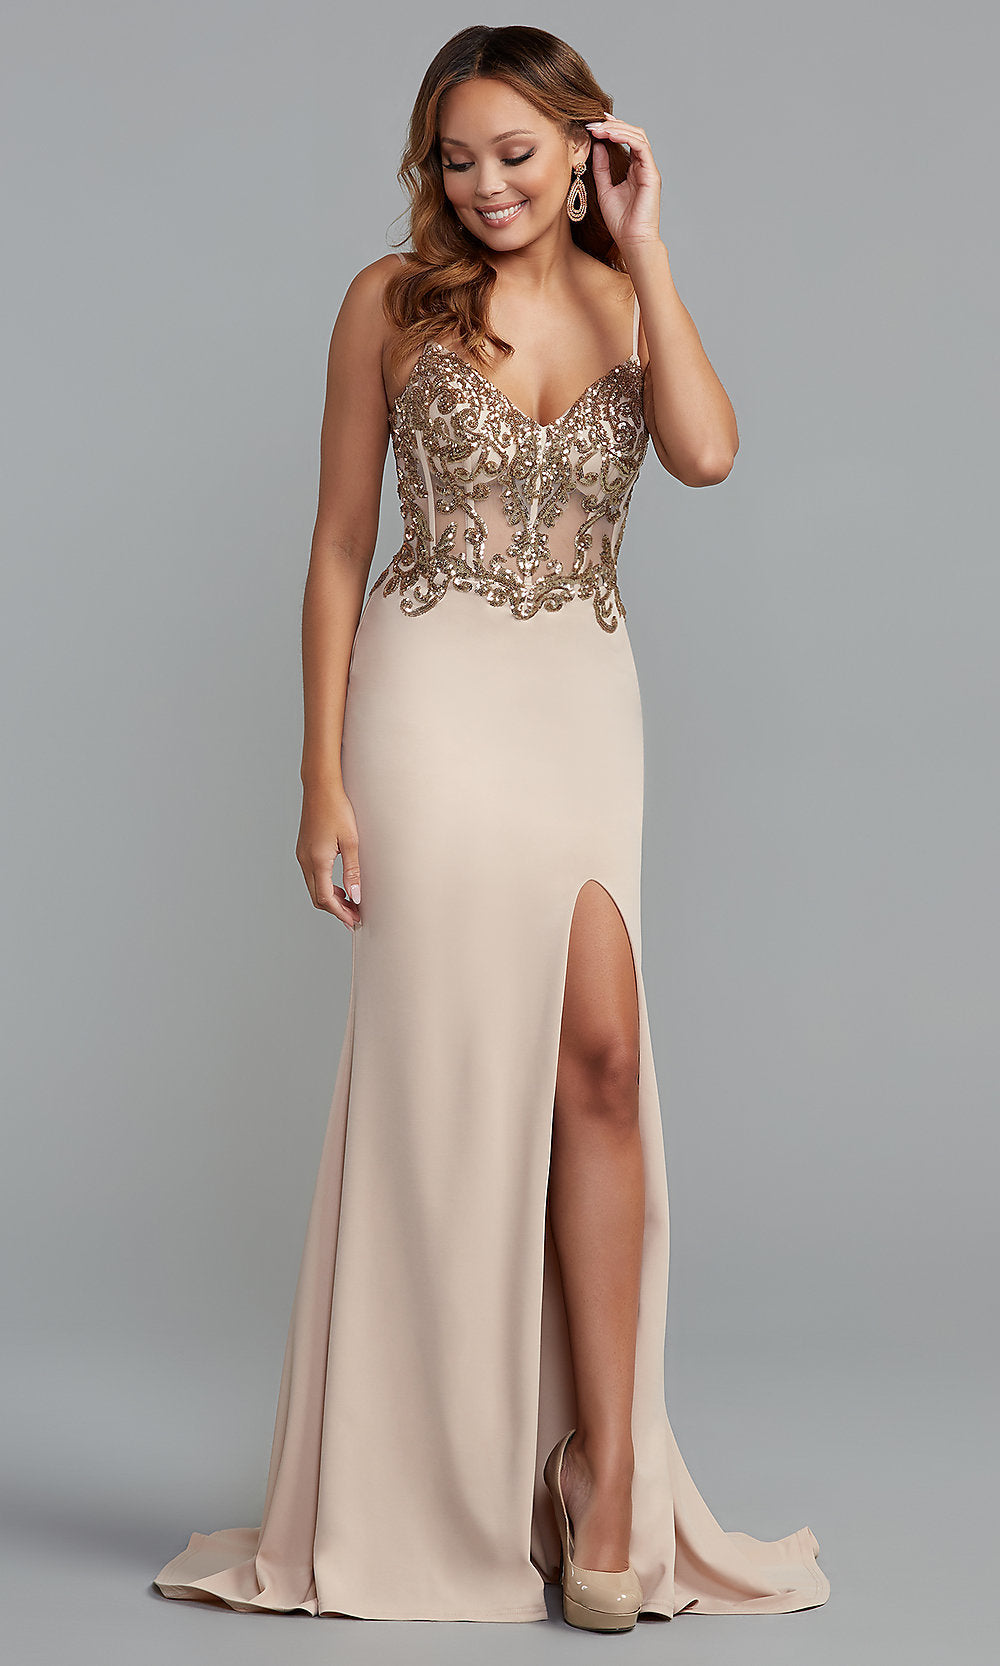 Champagne/Gold Long V-Neck Prom Dress with Sequined Sheer Bodice